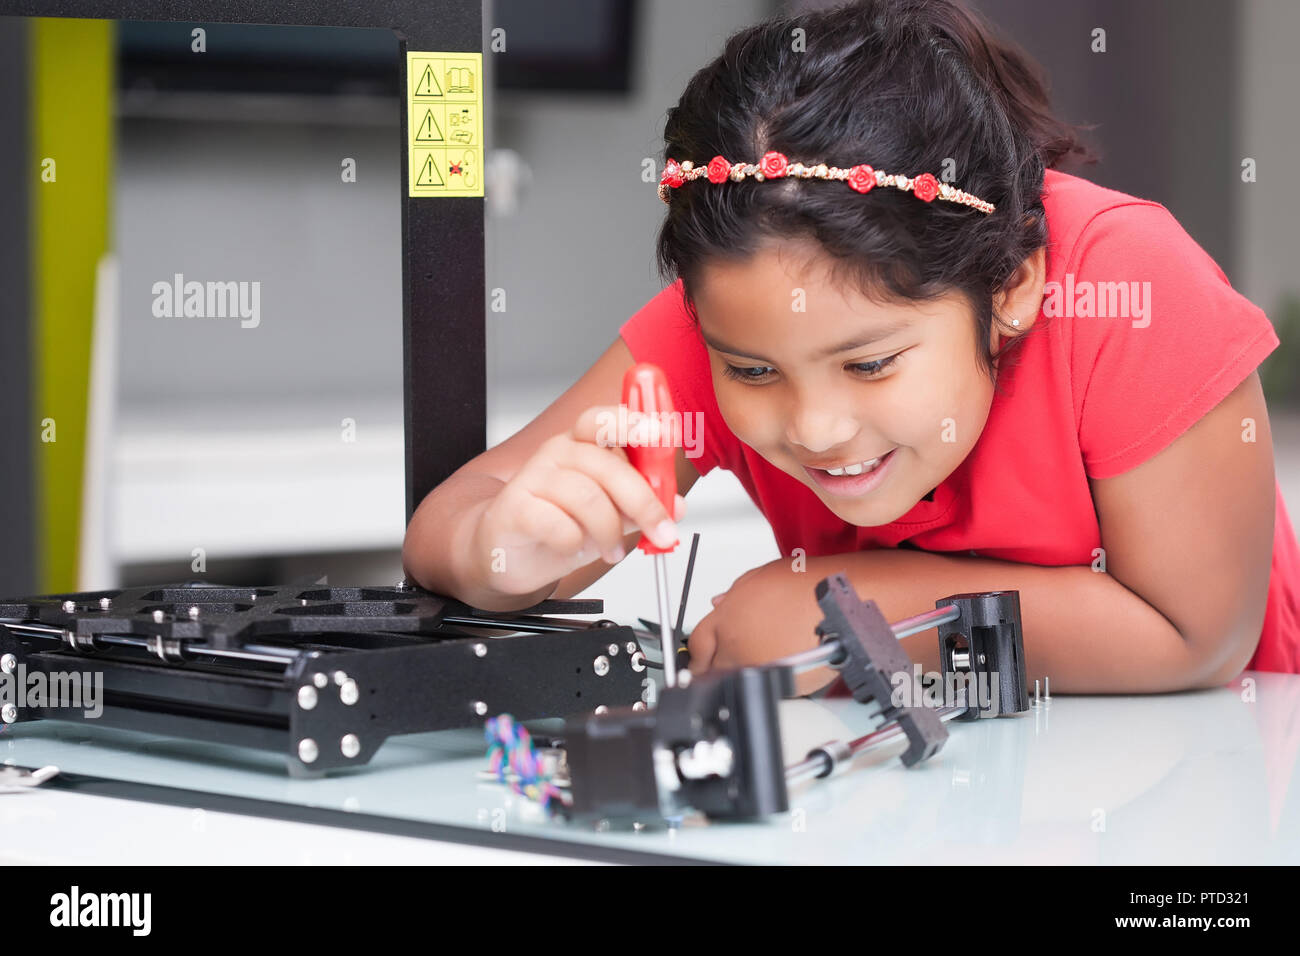 Genius level kid learning about 3D printers by building it and following  directions in STEM class Stock Photo - Alamy